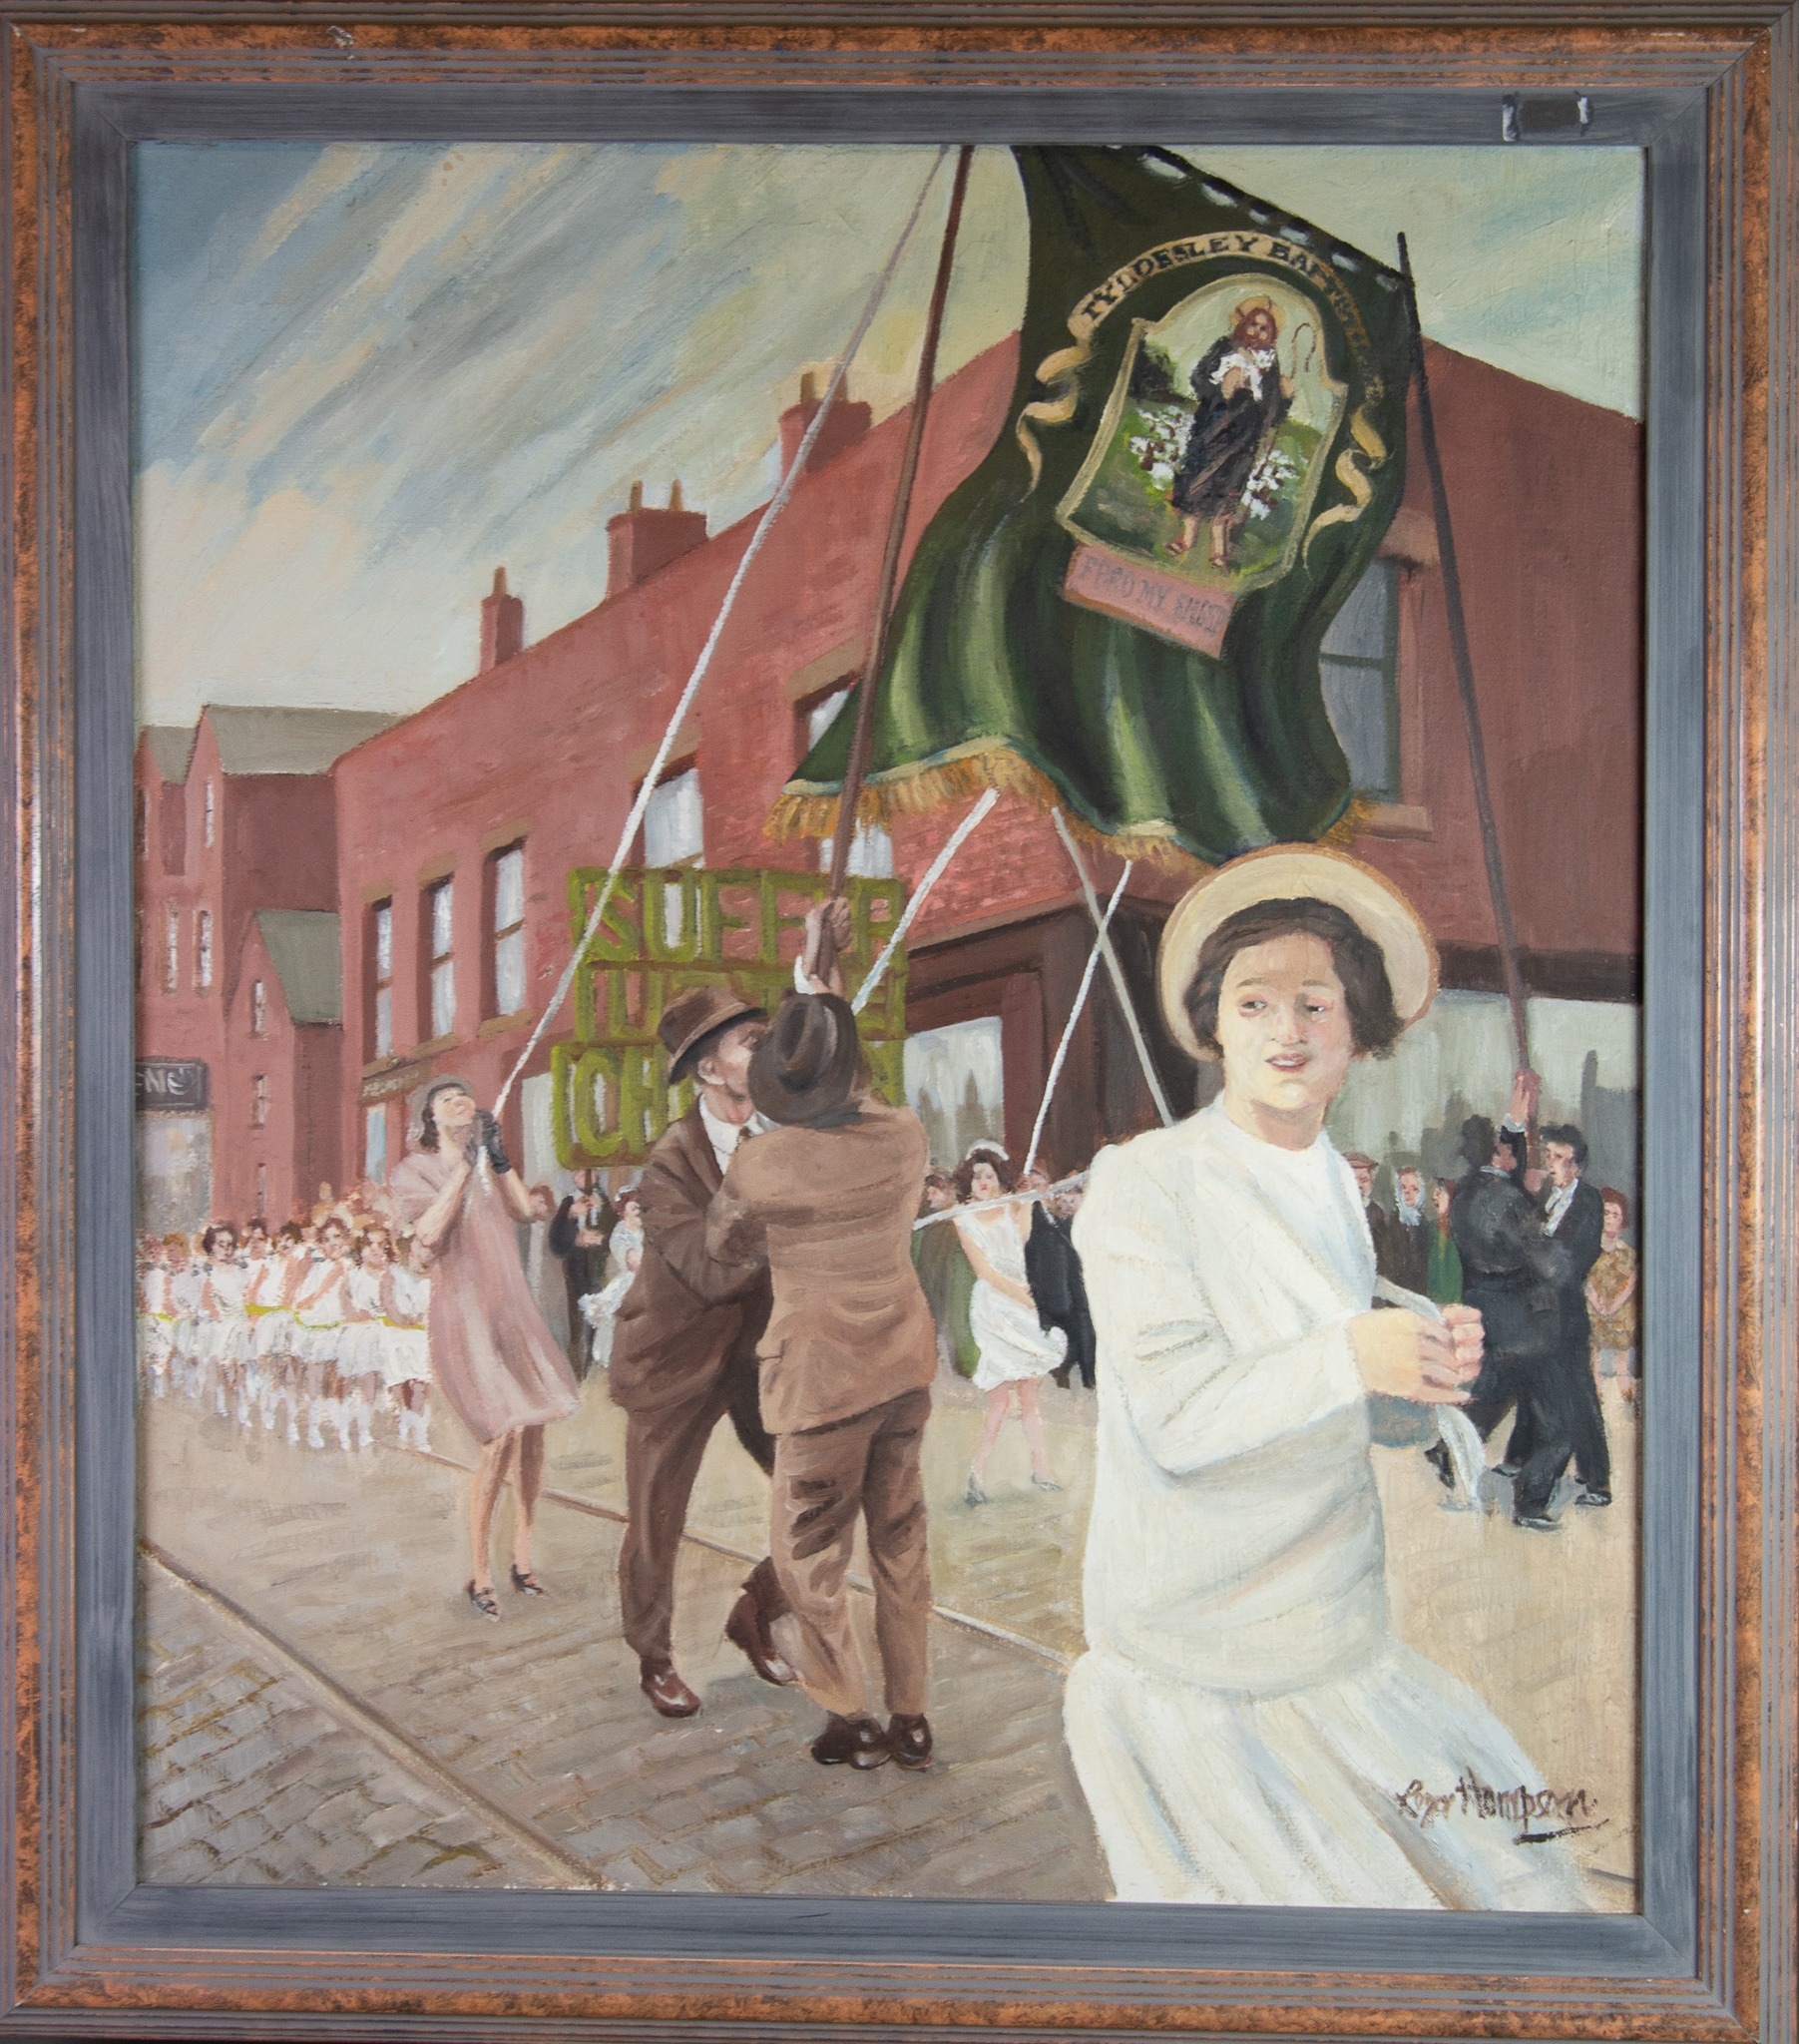 ROGER HAMPSON (1925 - 1996) OIL PAINTING ON CANVAS Walking Day Incident, whit walks with banner - Image 2 of 2